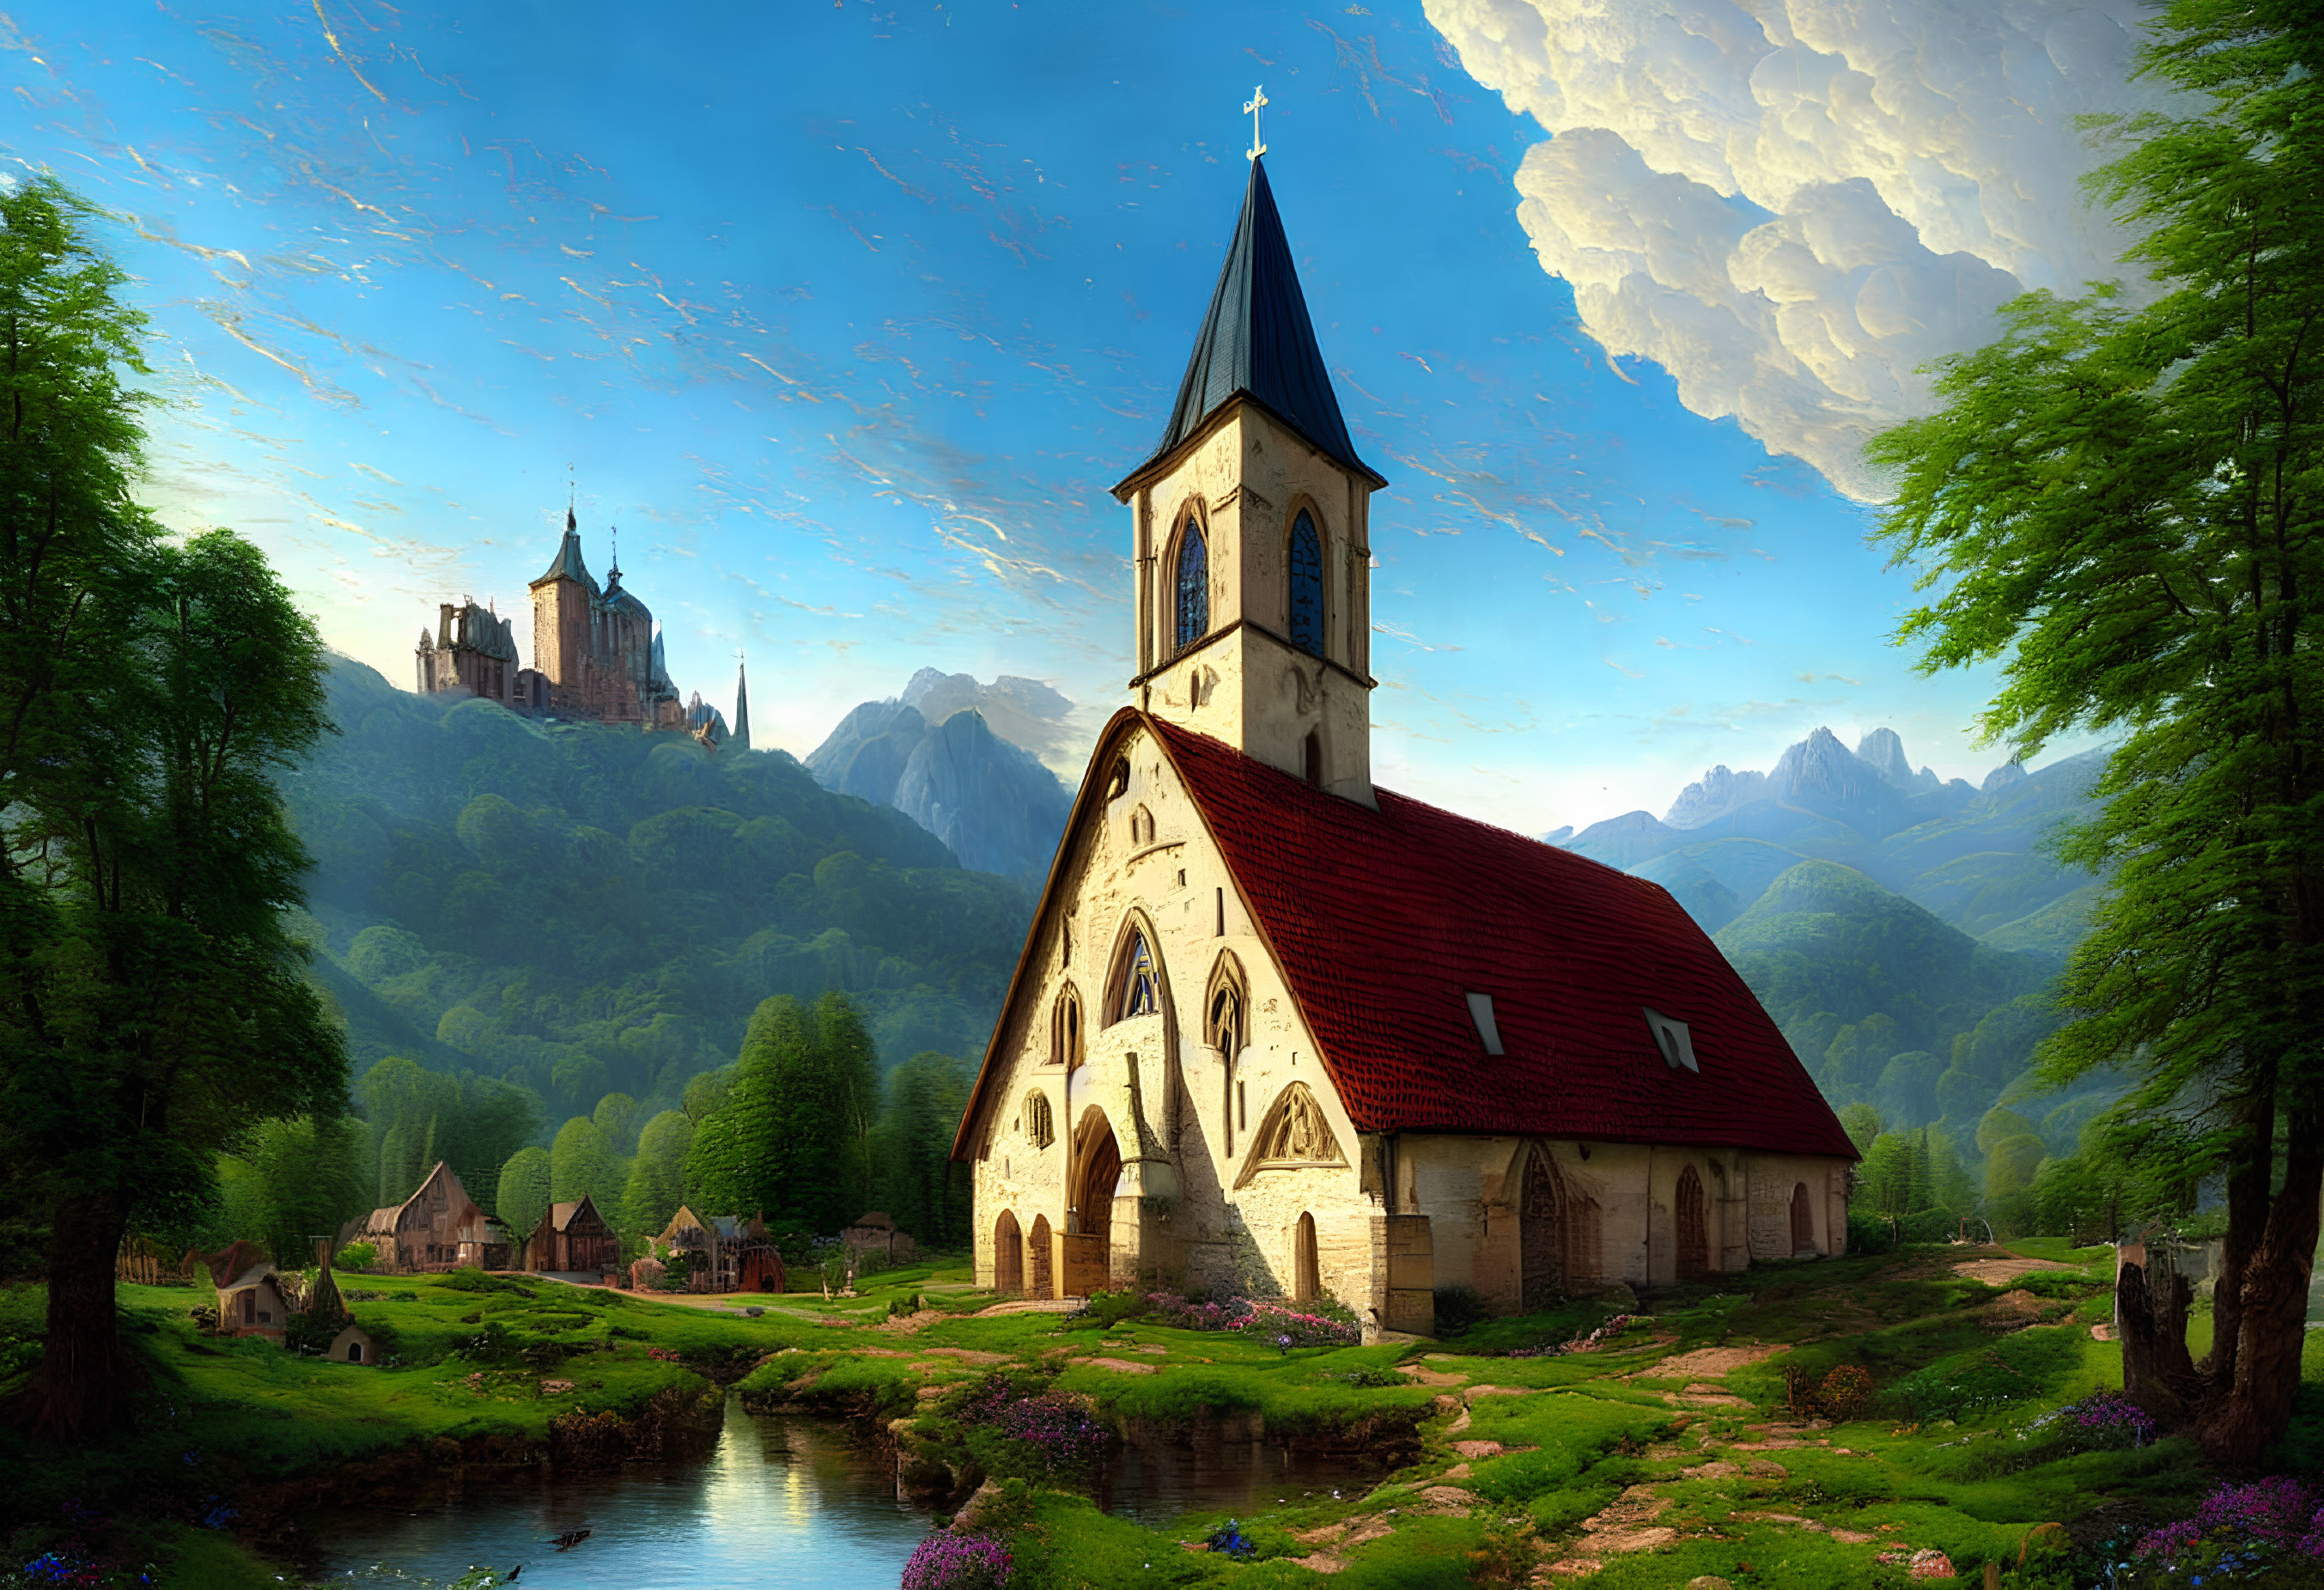 Old church, river, castle, mountains, and sky in scenic landscape.